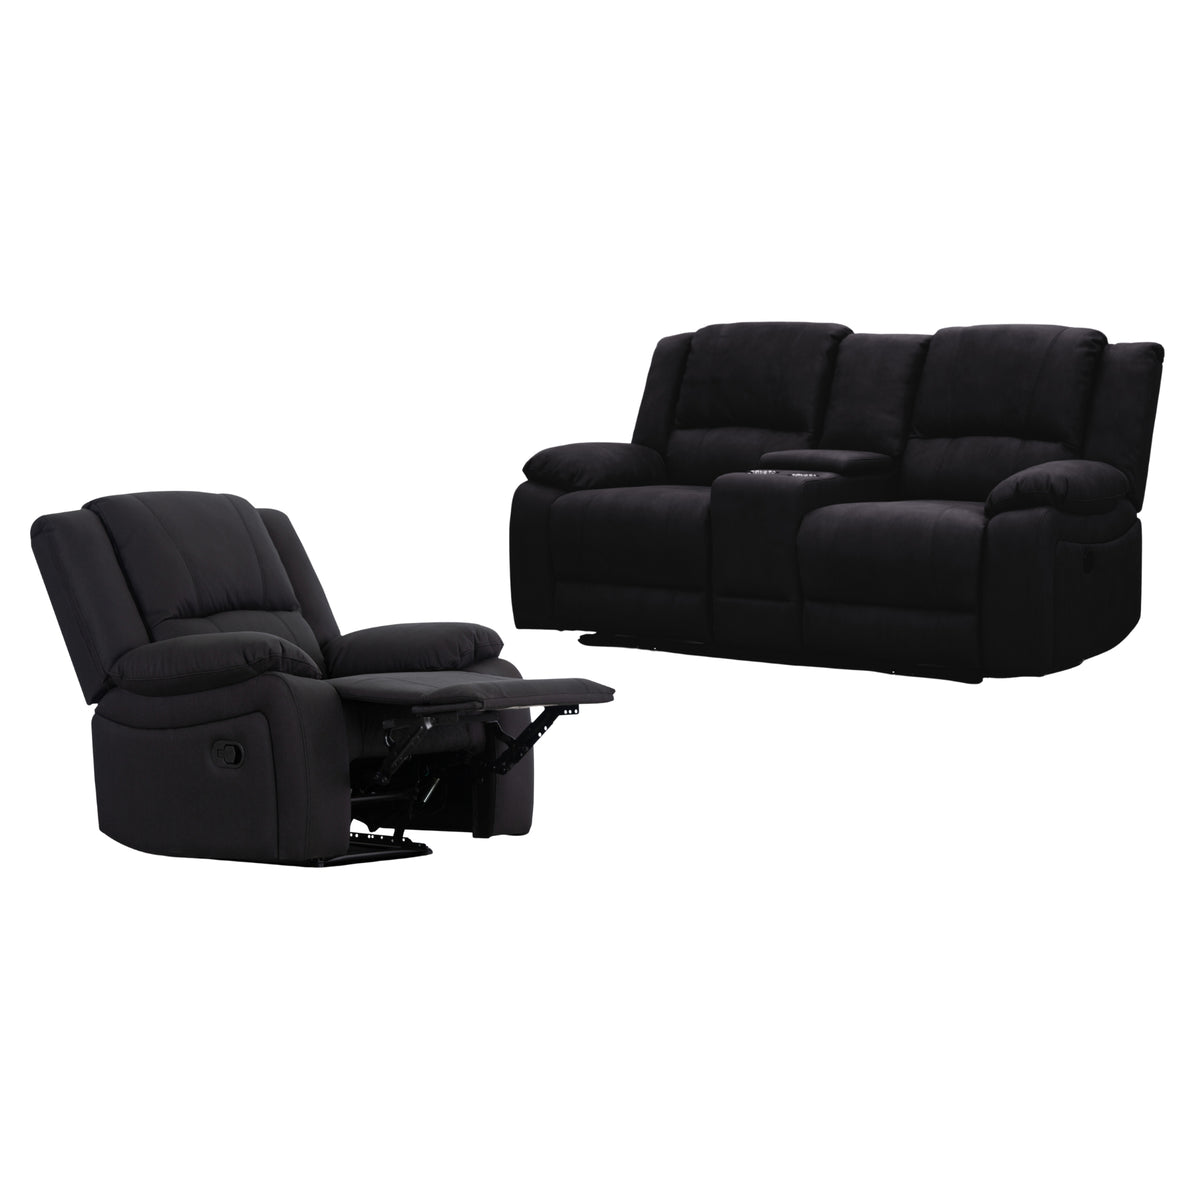 Anderson Fabric Electric Recliner Sofa Lounge Chair ONYX Black 1 + 2 Seater